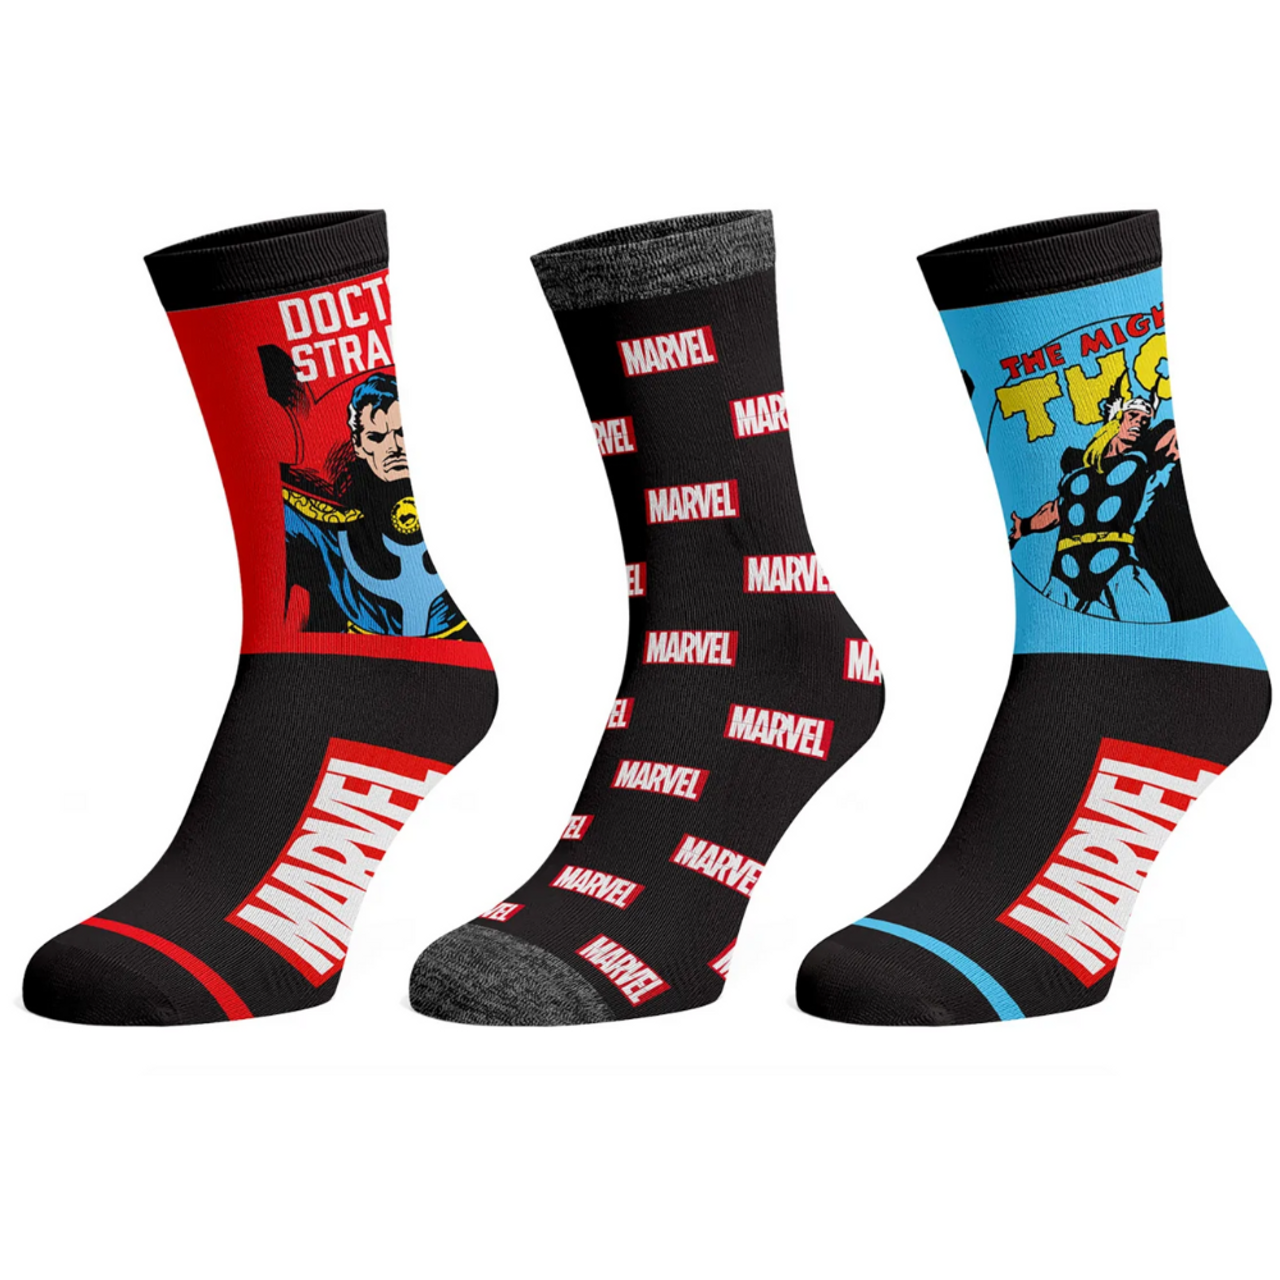 Marvel Doctor Strange and Thor 3-Pair Pack of Crew Socks by Bioworld